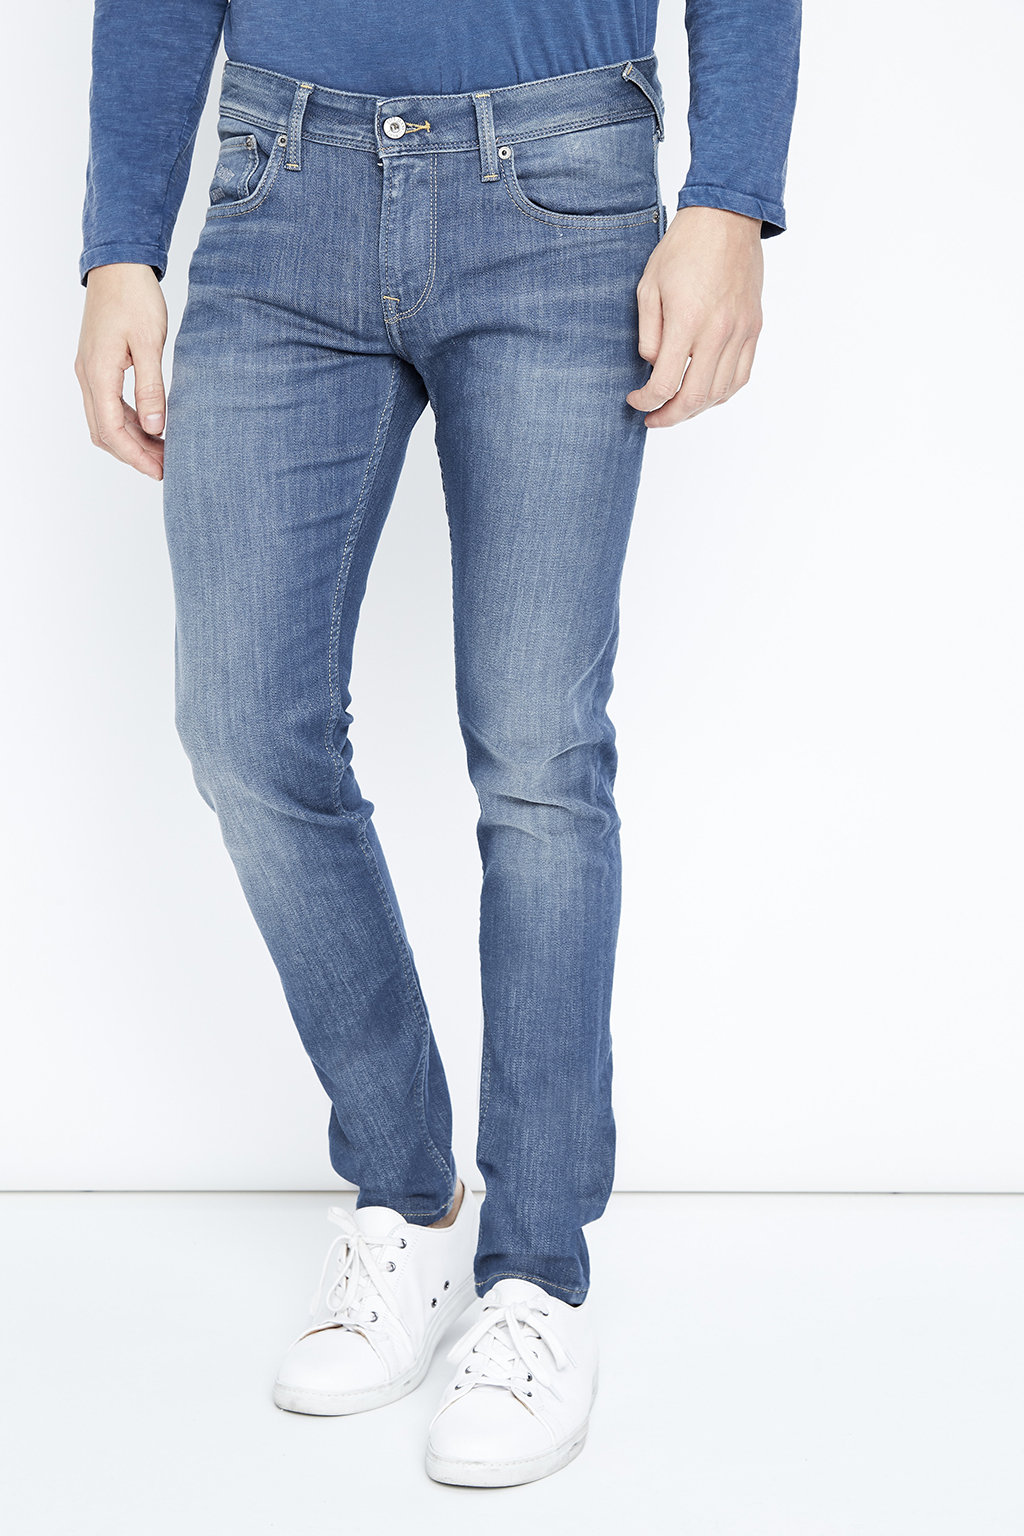 Pepe Jeans jean homme